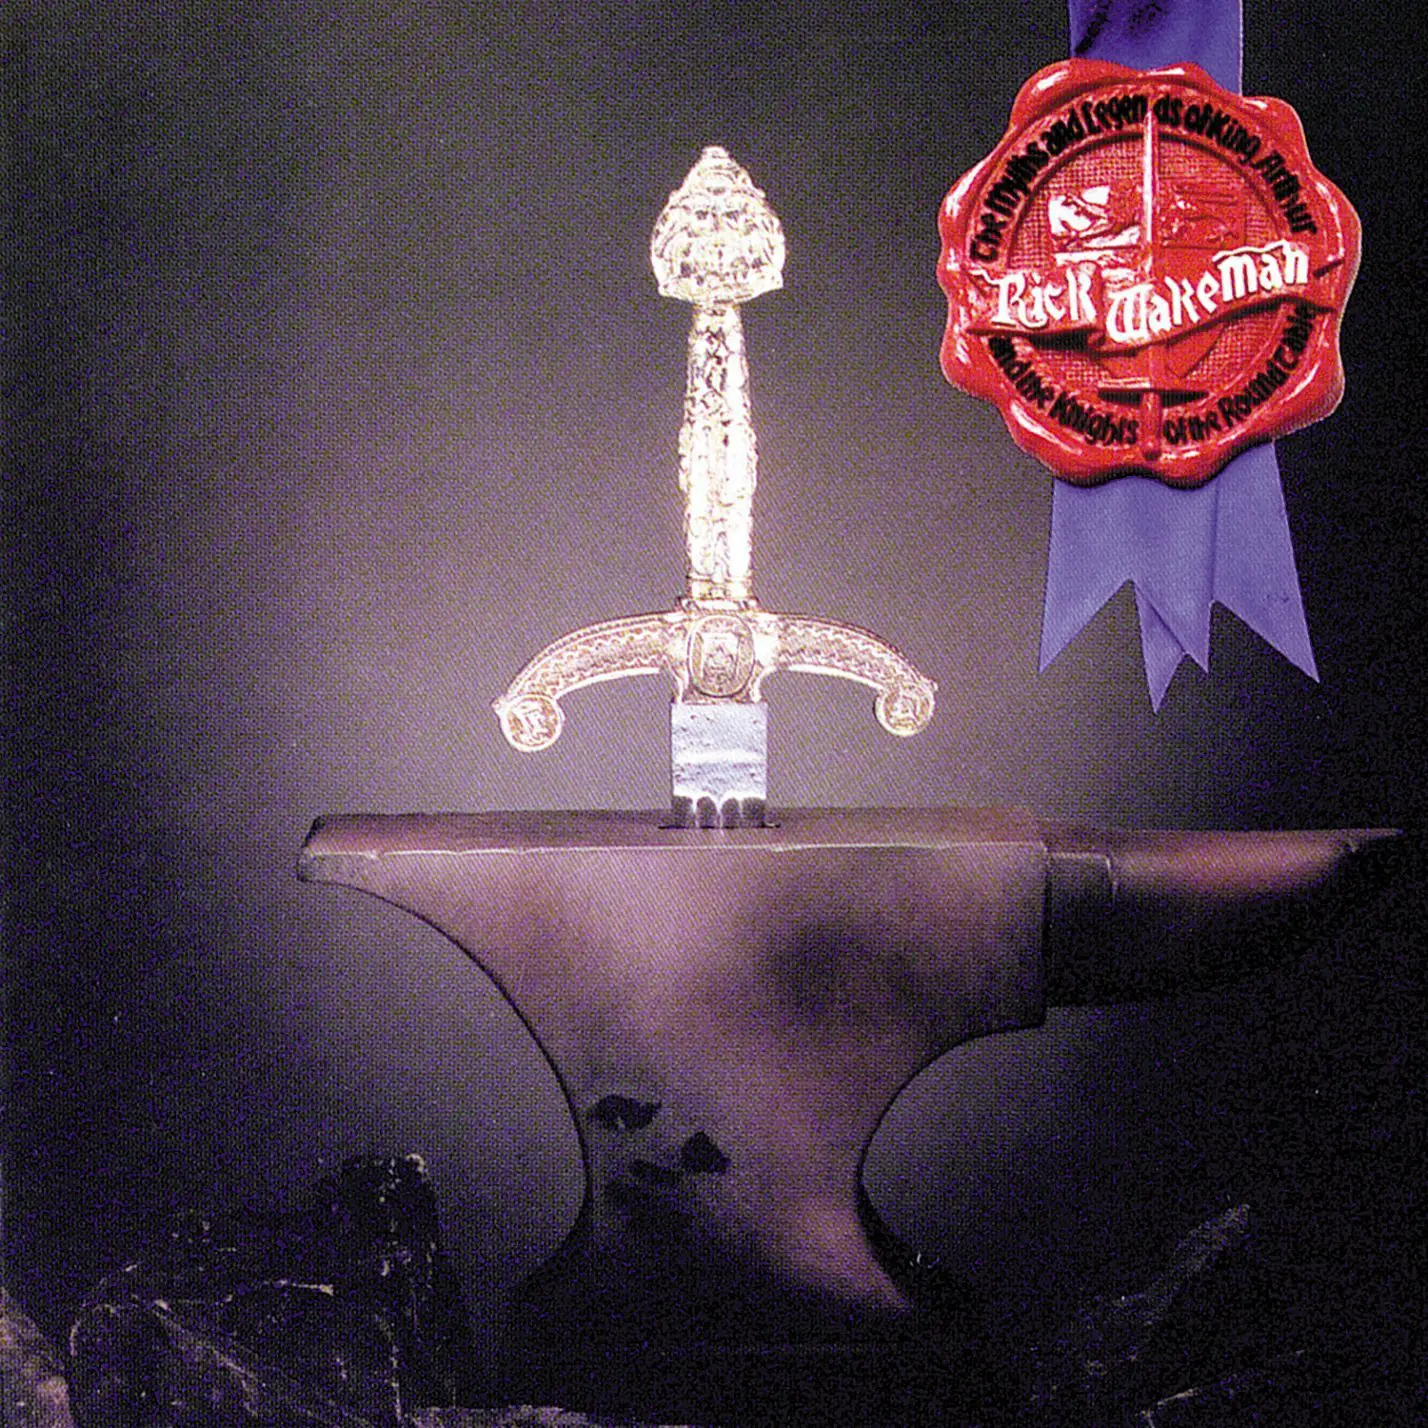 Myths And Legends Of King Arthur And The Knights Of The Round Table by Rick Wakeman